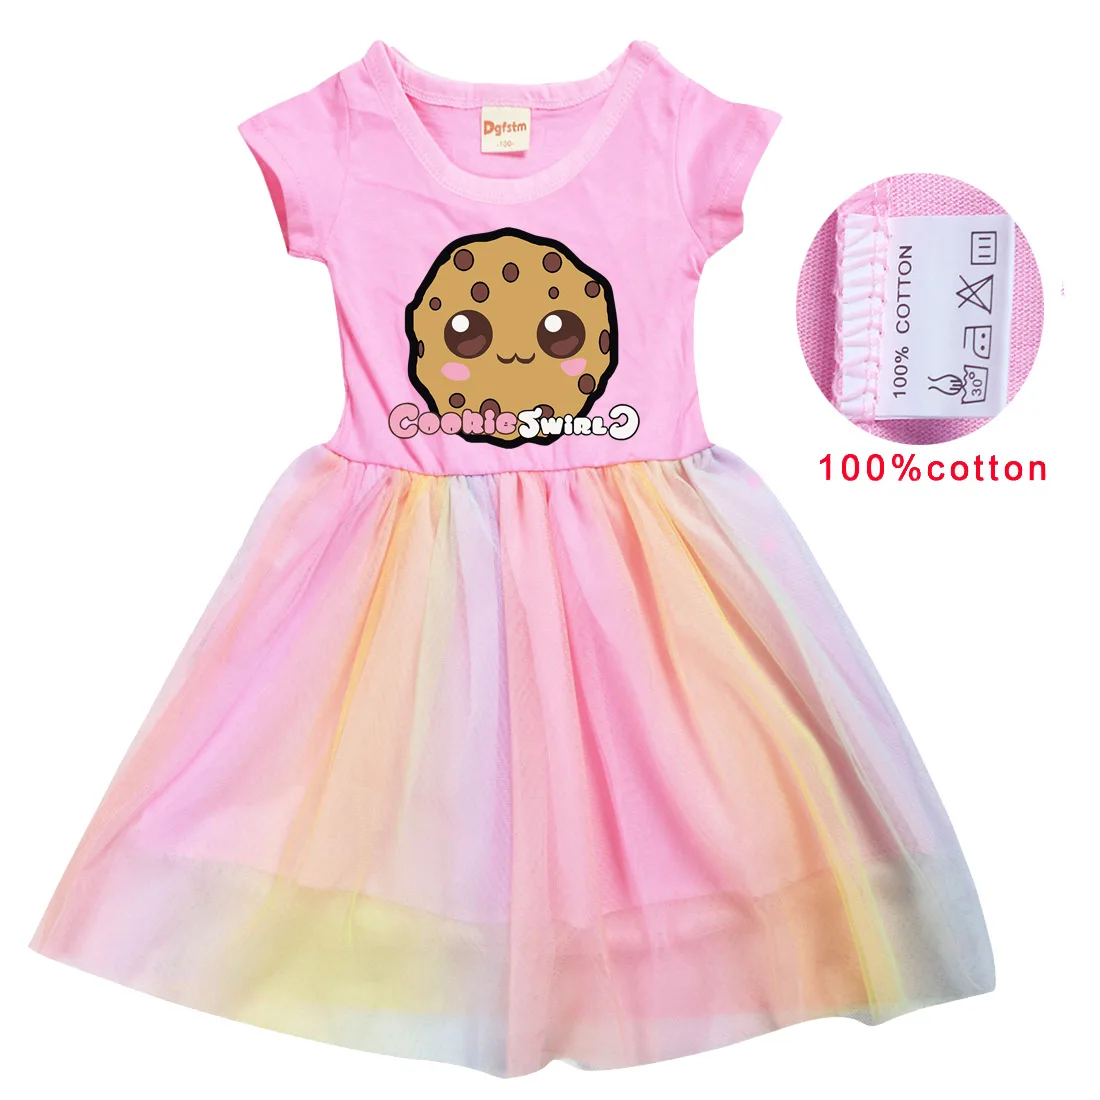 

Cookie Swirl C Clothes Kids Short Sleeve Casual Dresses Toddler Girls Rainbow Birthday Party Dress Baby Sequin Vestidos